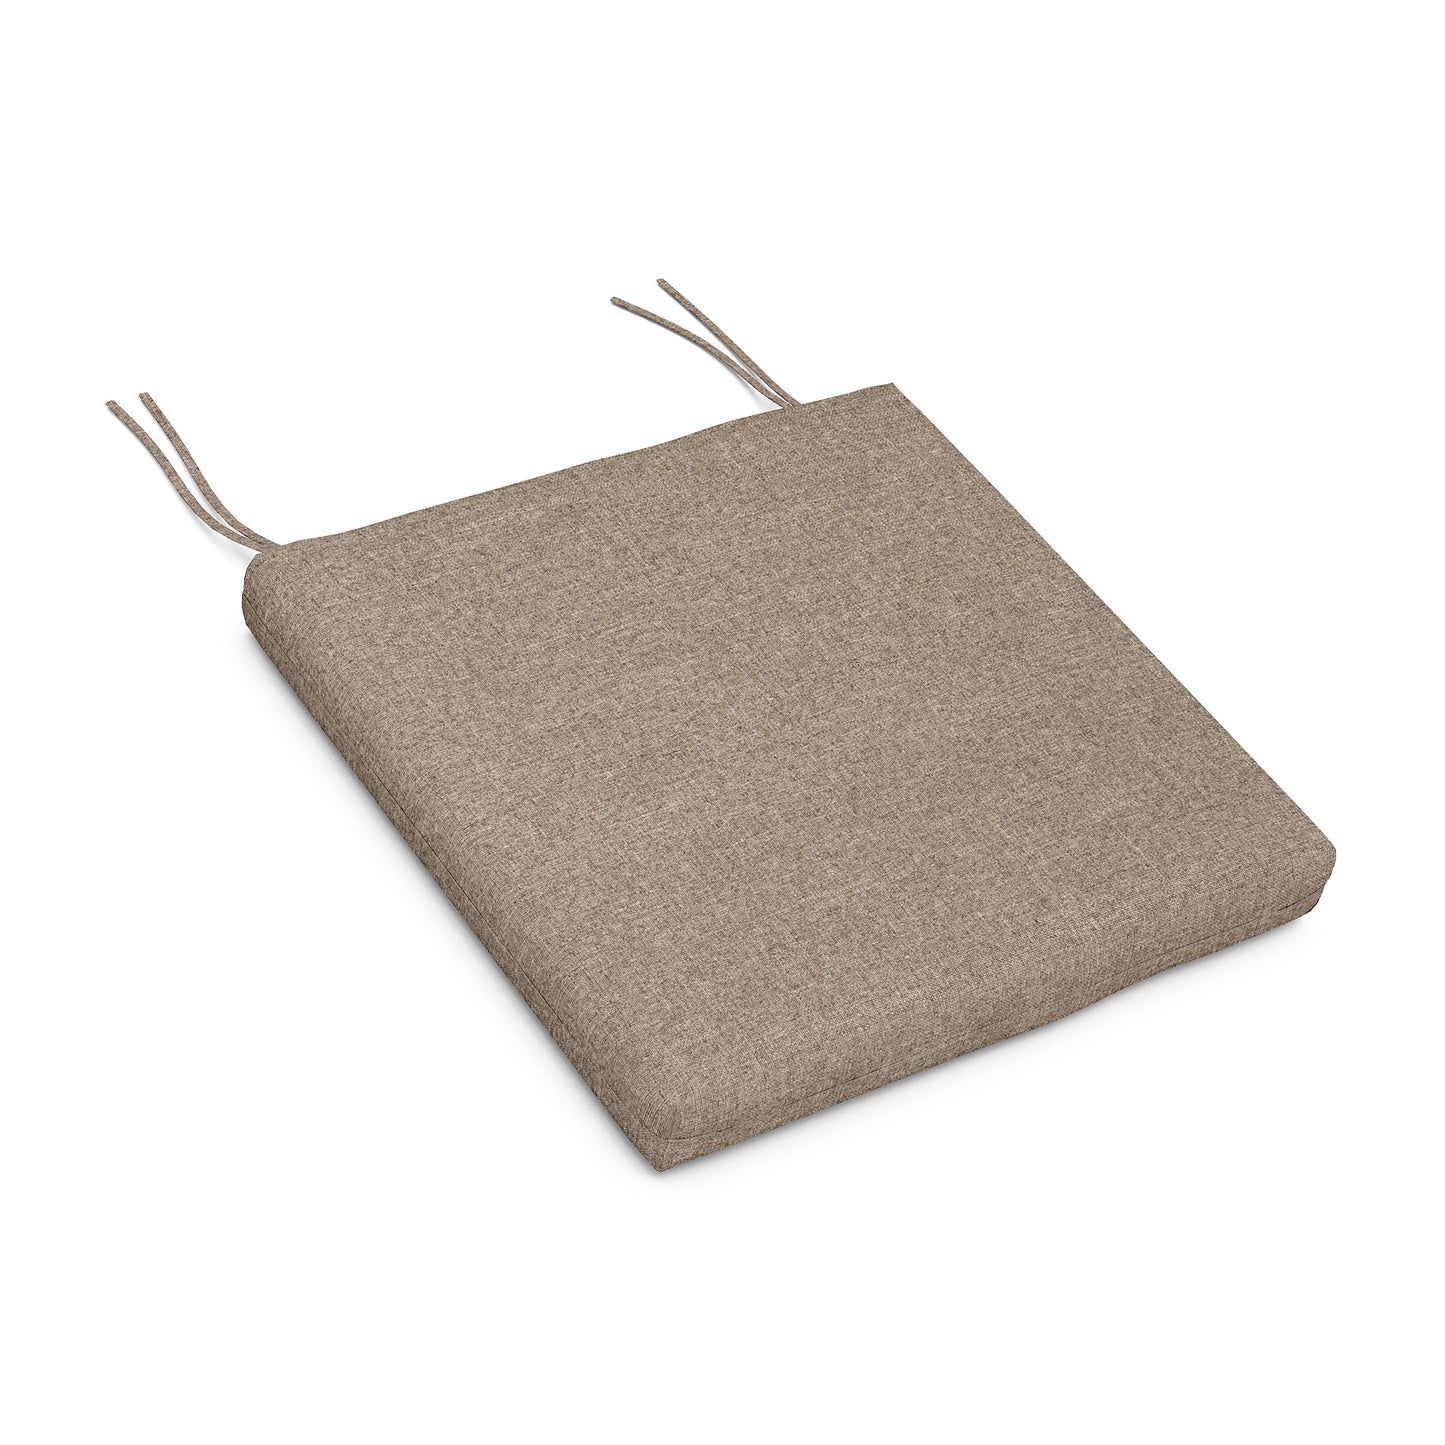 A beige weather-resistant POLYWOOD upholstery fabric-covered XPWS0008 seat cushion with two protruding metal prongs, isolated on a white background.